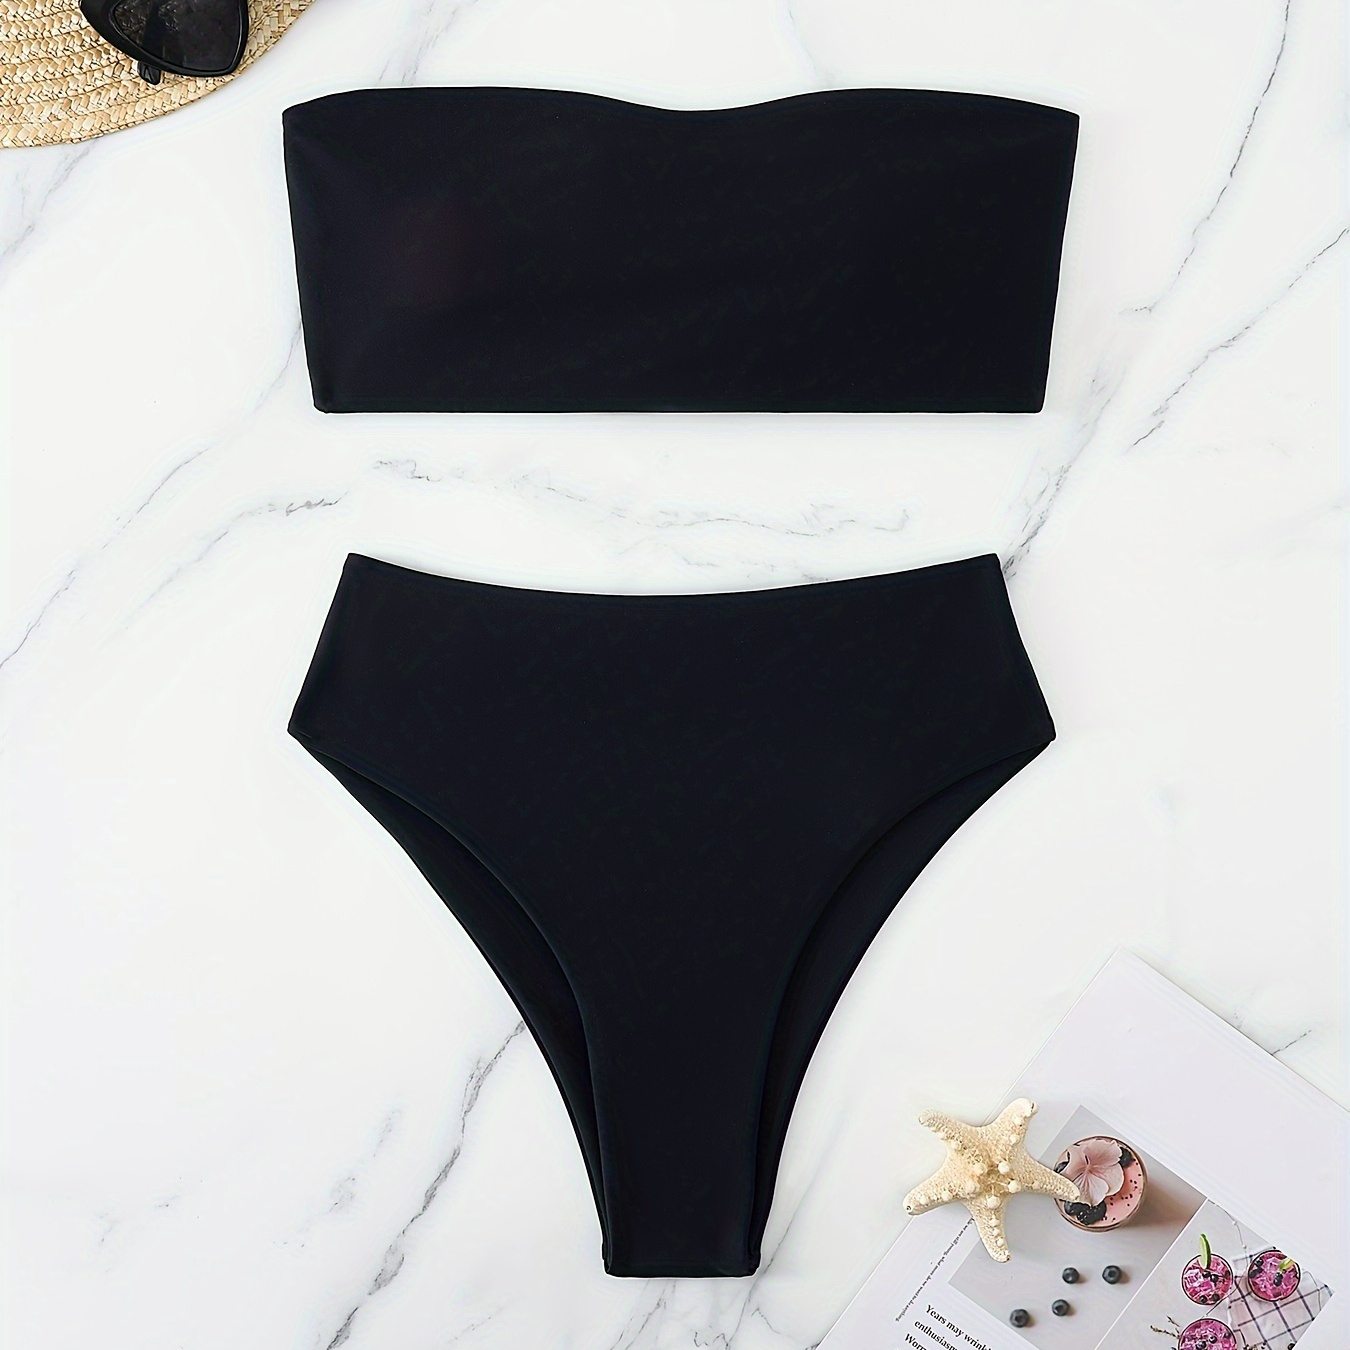 

Solid Color Bandeau 2 Piece Set Bikini, Lace Up Detail Tube Top & High Cut Panty Swimsuits, Women's Swimwear & Clothing